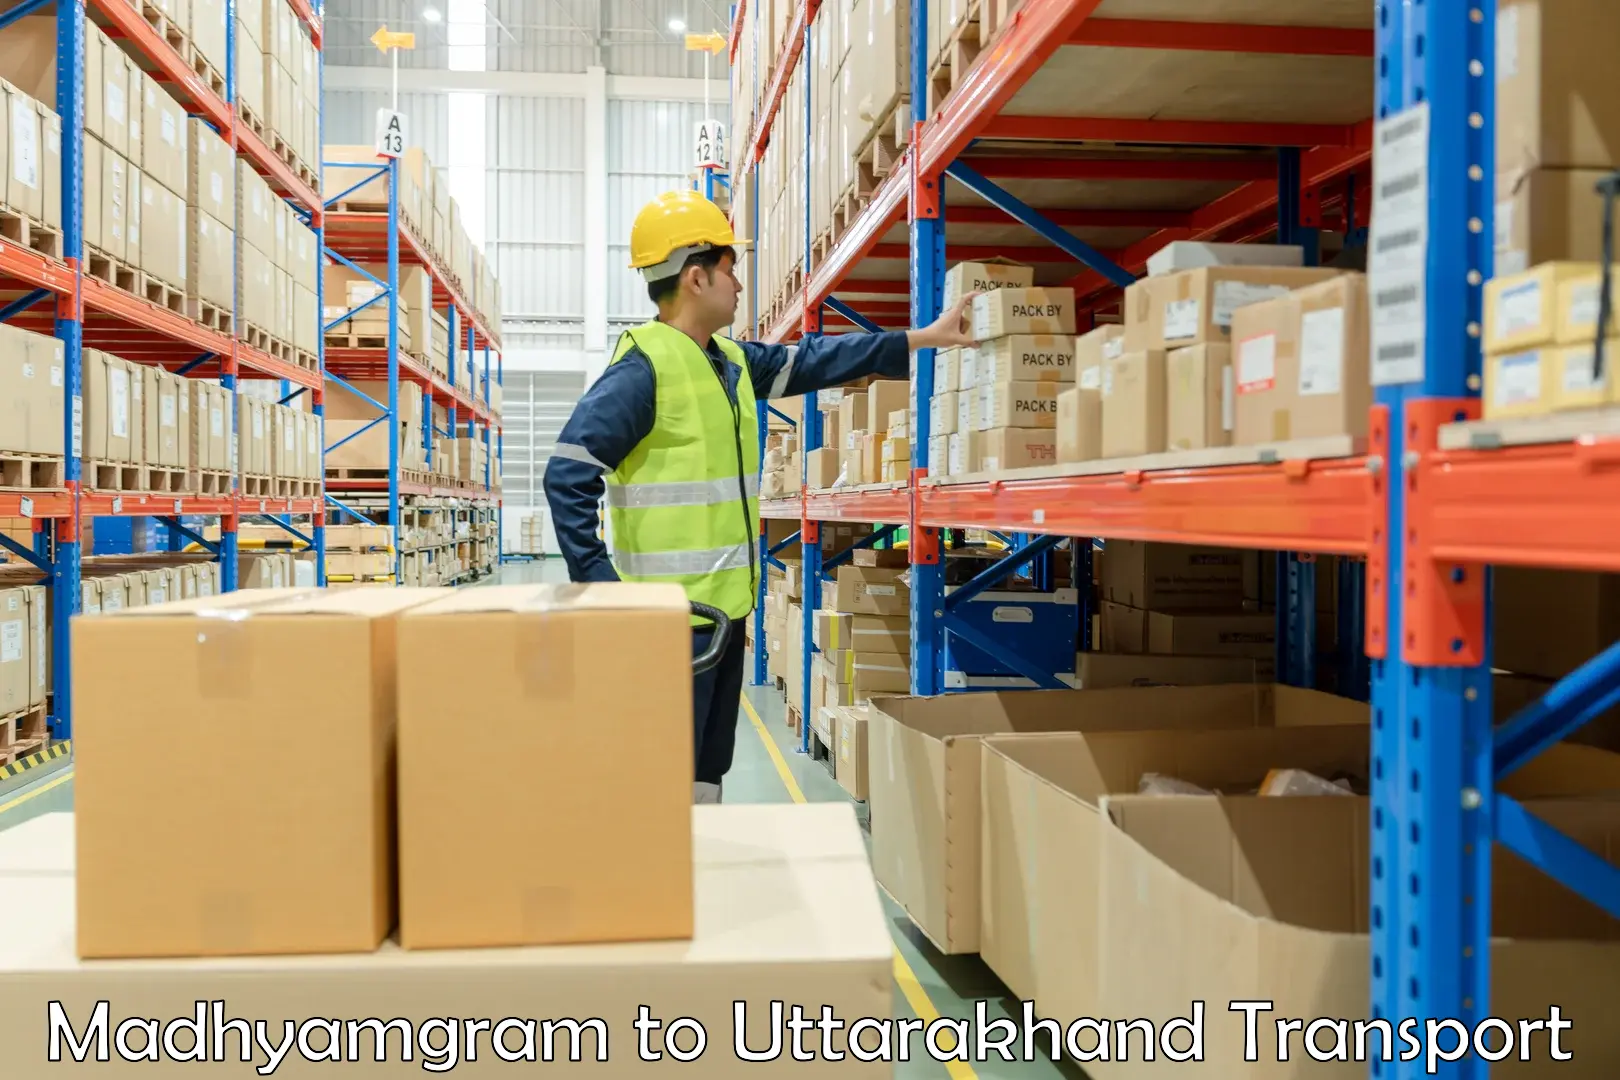 Truck transport companies in India Madhyamgram to IIT Roorkee